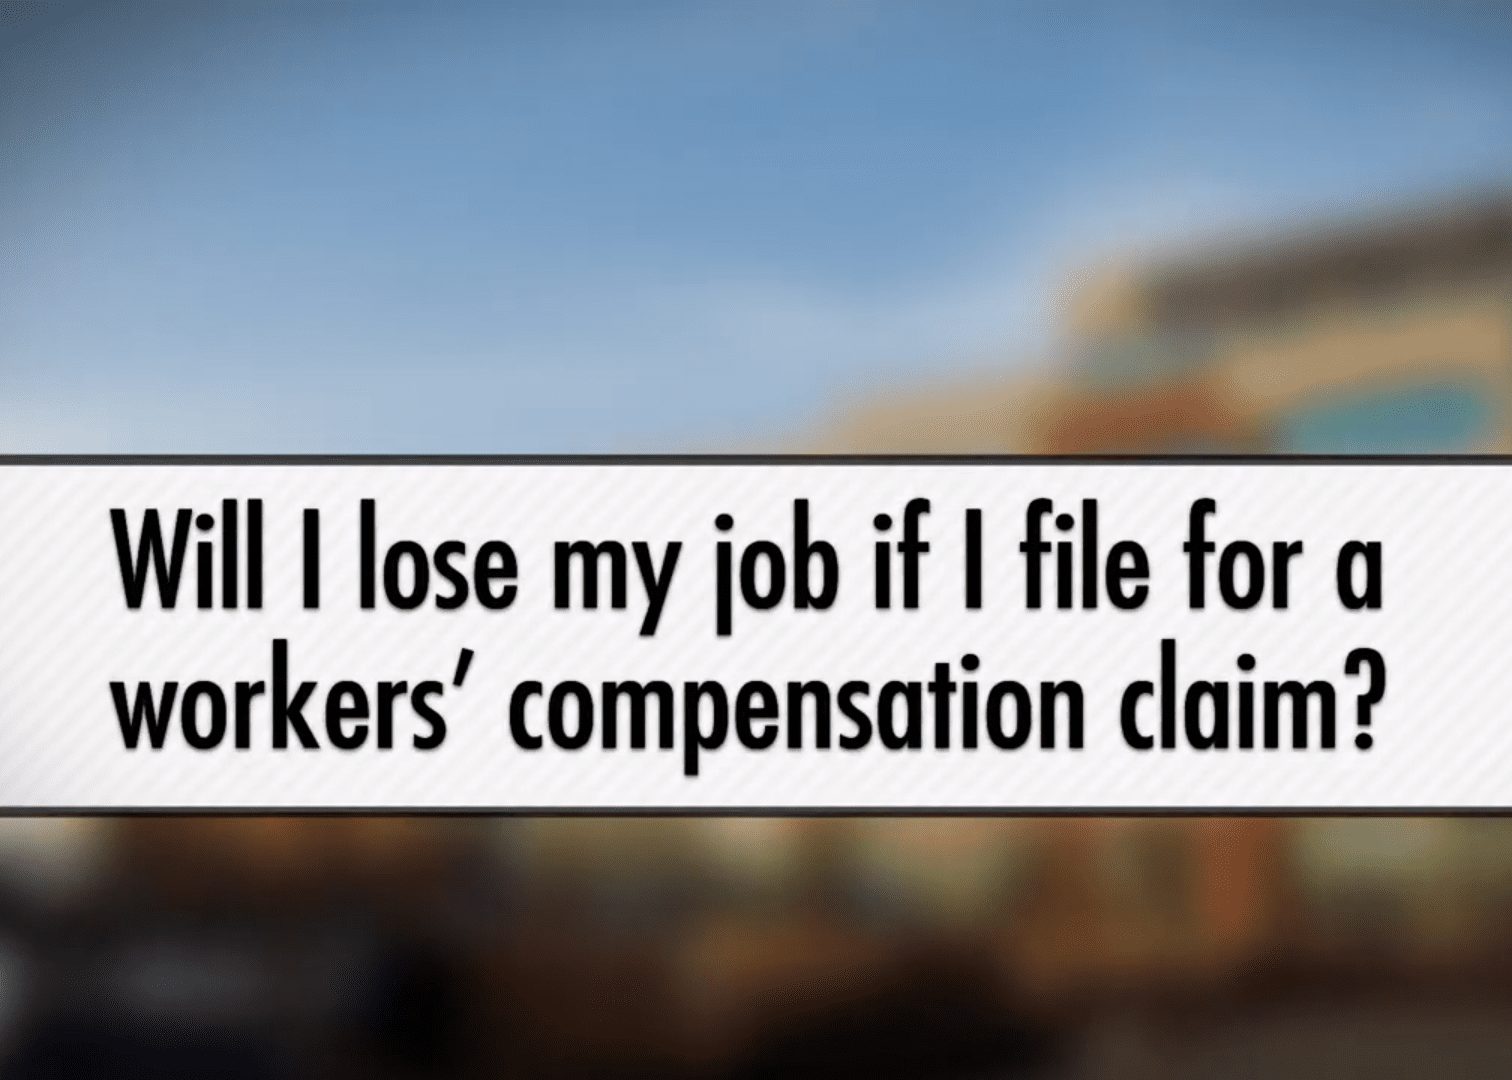 Will I lose my job if I file for a workers' compensation claim